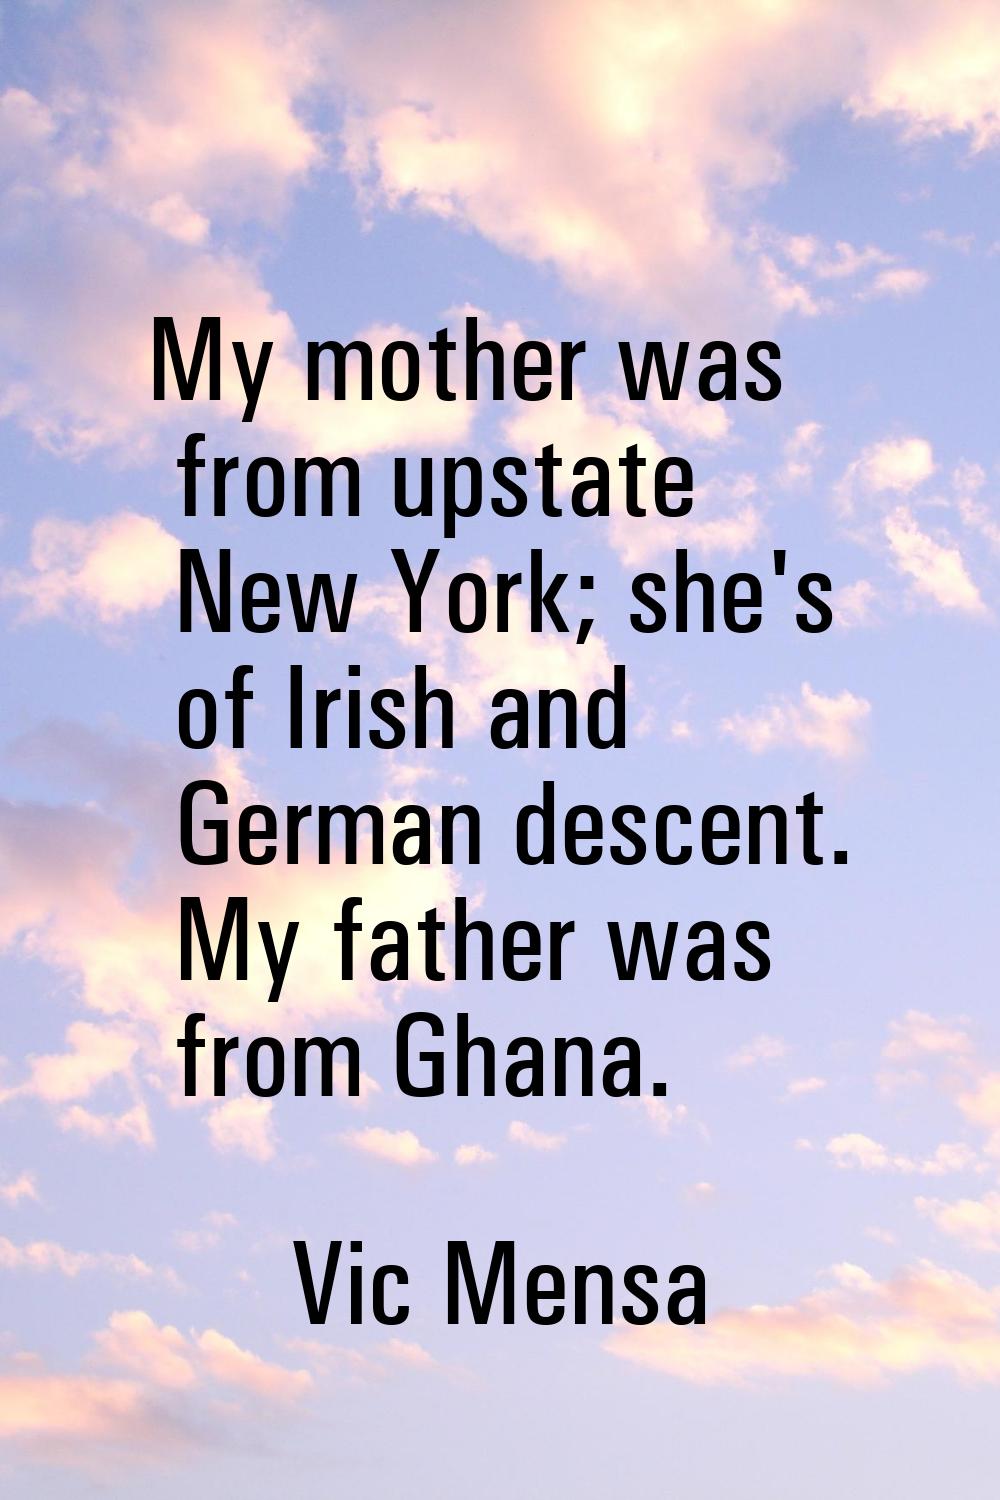 My mother was from upstate New York; she's of Irish and German descent. My father was from Ghana.